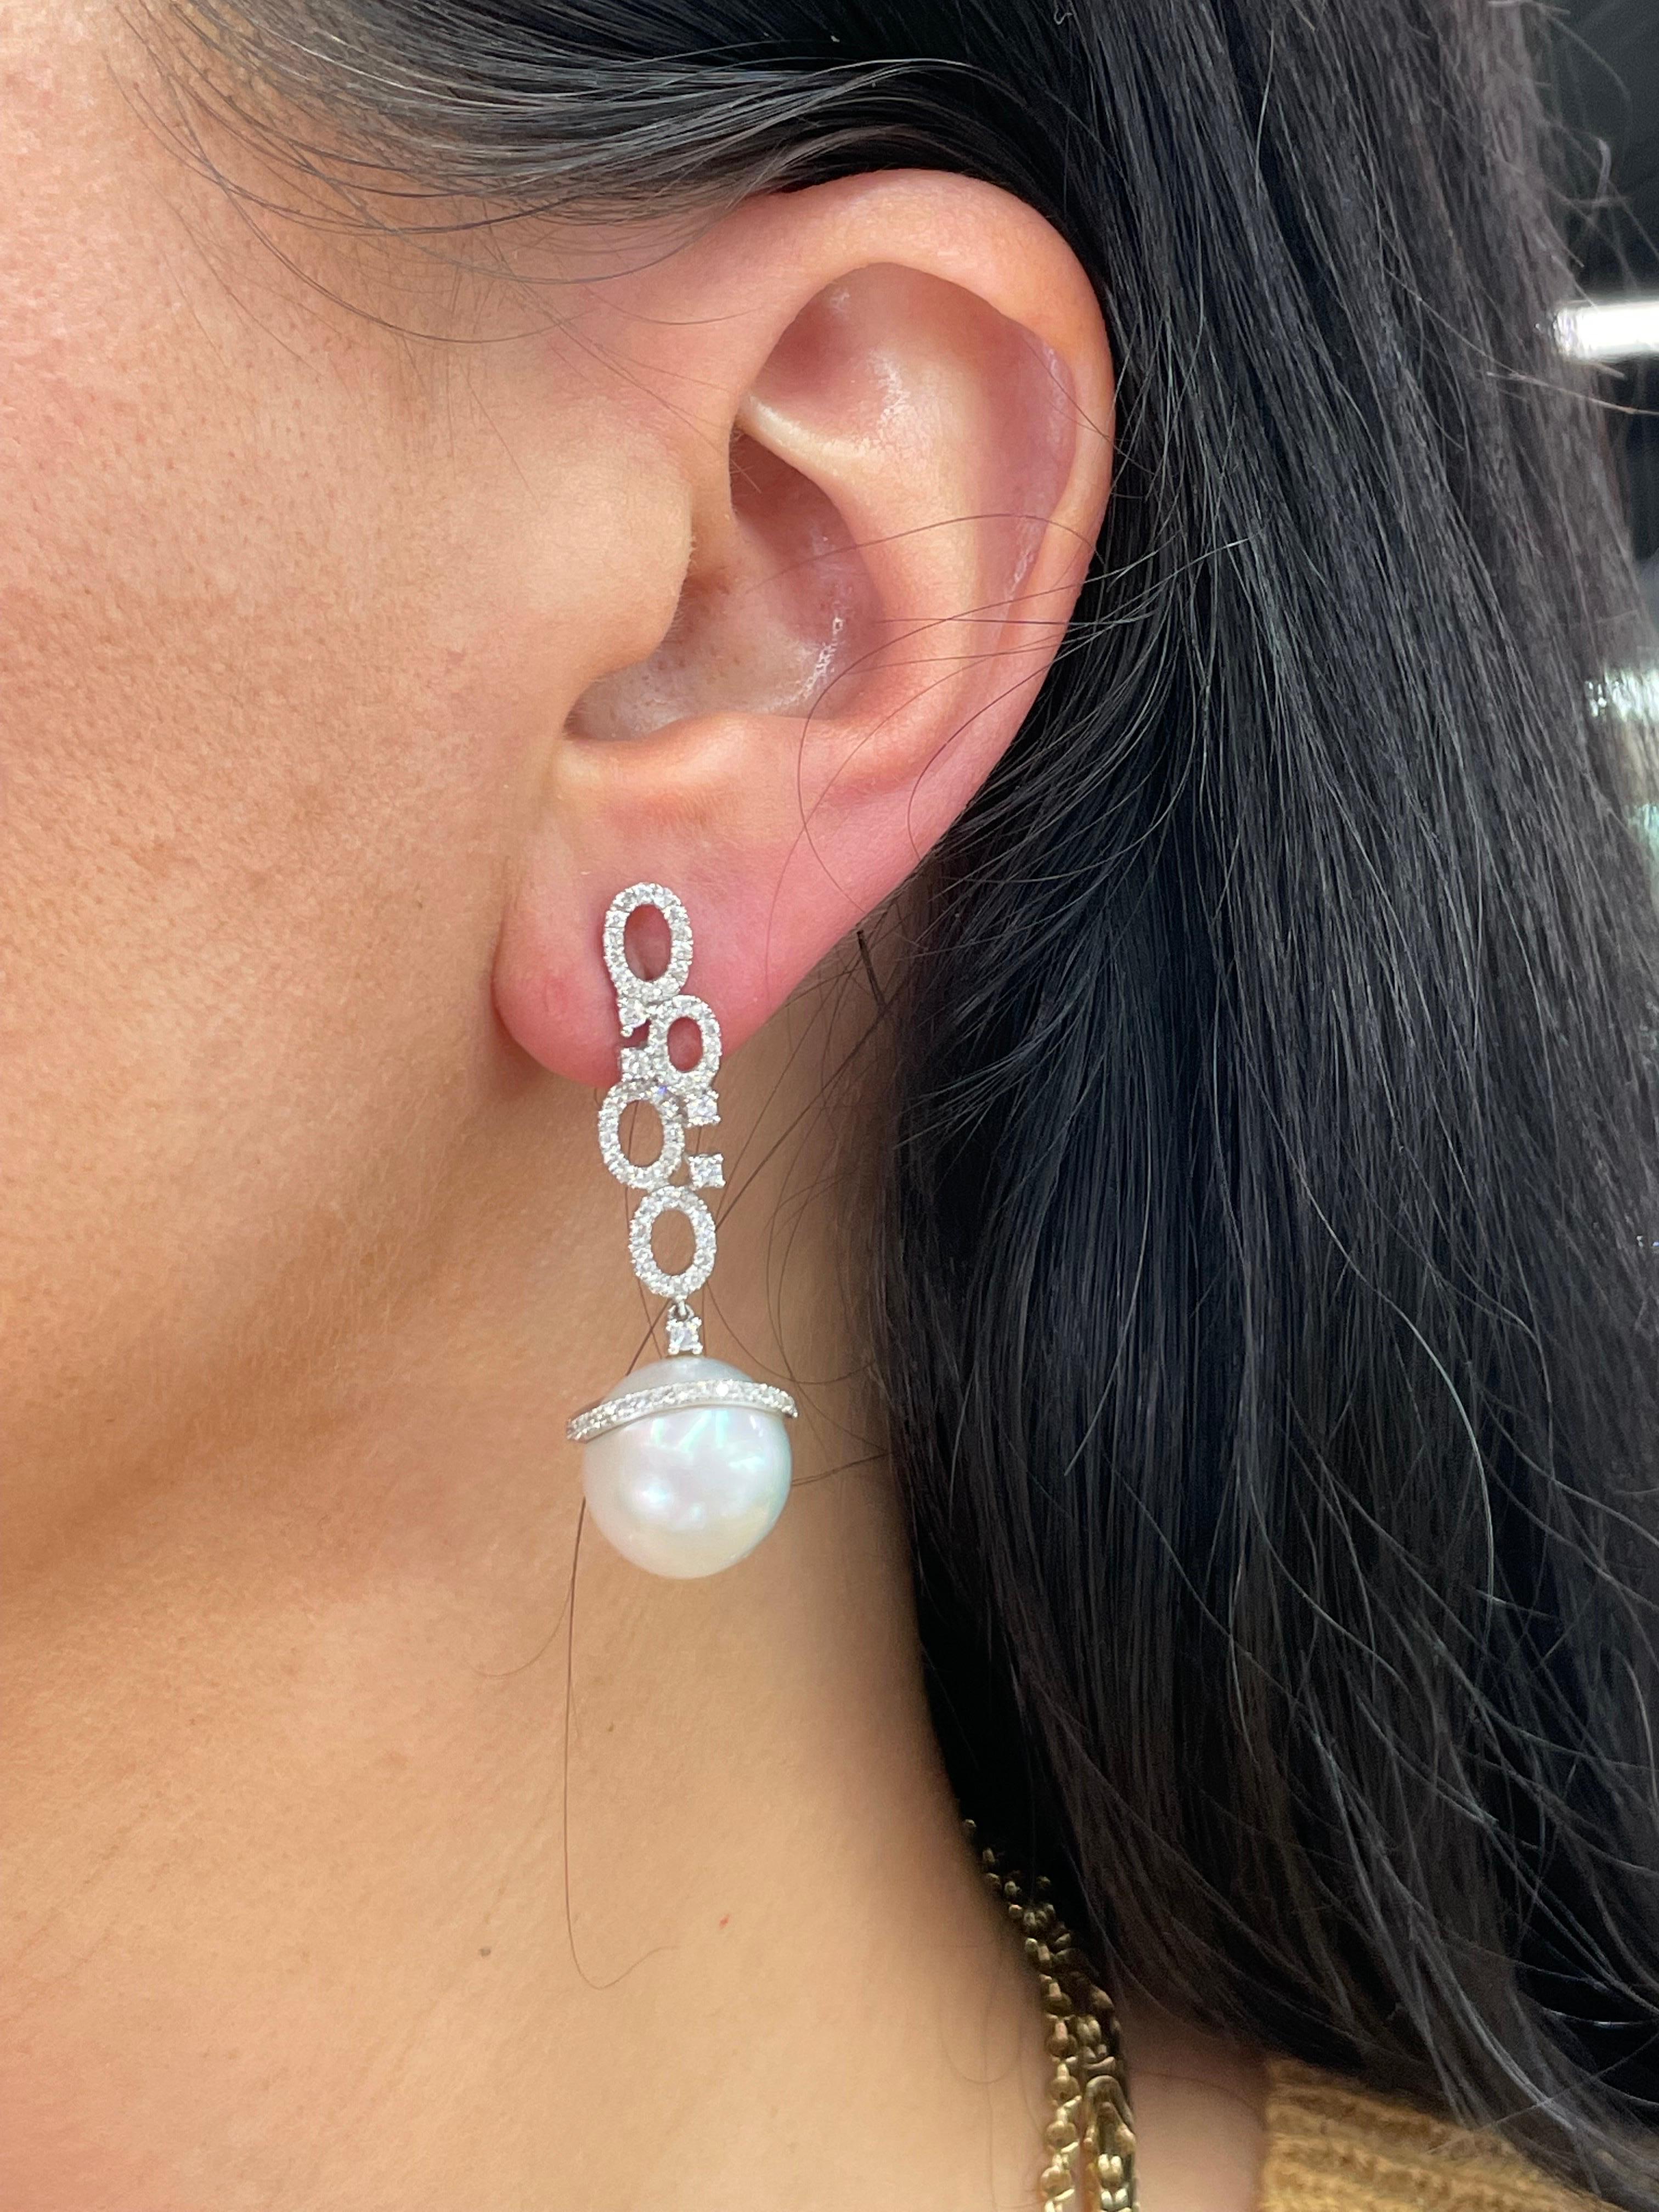 18 Karat White Gold drop earrings featuring 144 round brilliants weighing 0.97 carats with two South Sea Pearls measuring 12-13 MM.
Color- G-H
Clarity SI

Can customize in Pink Freshwater, Golden South Sea, & Tahitian Pearl
DM for pricing & more